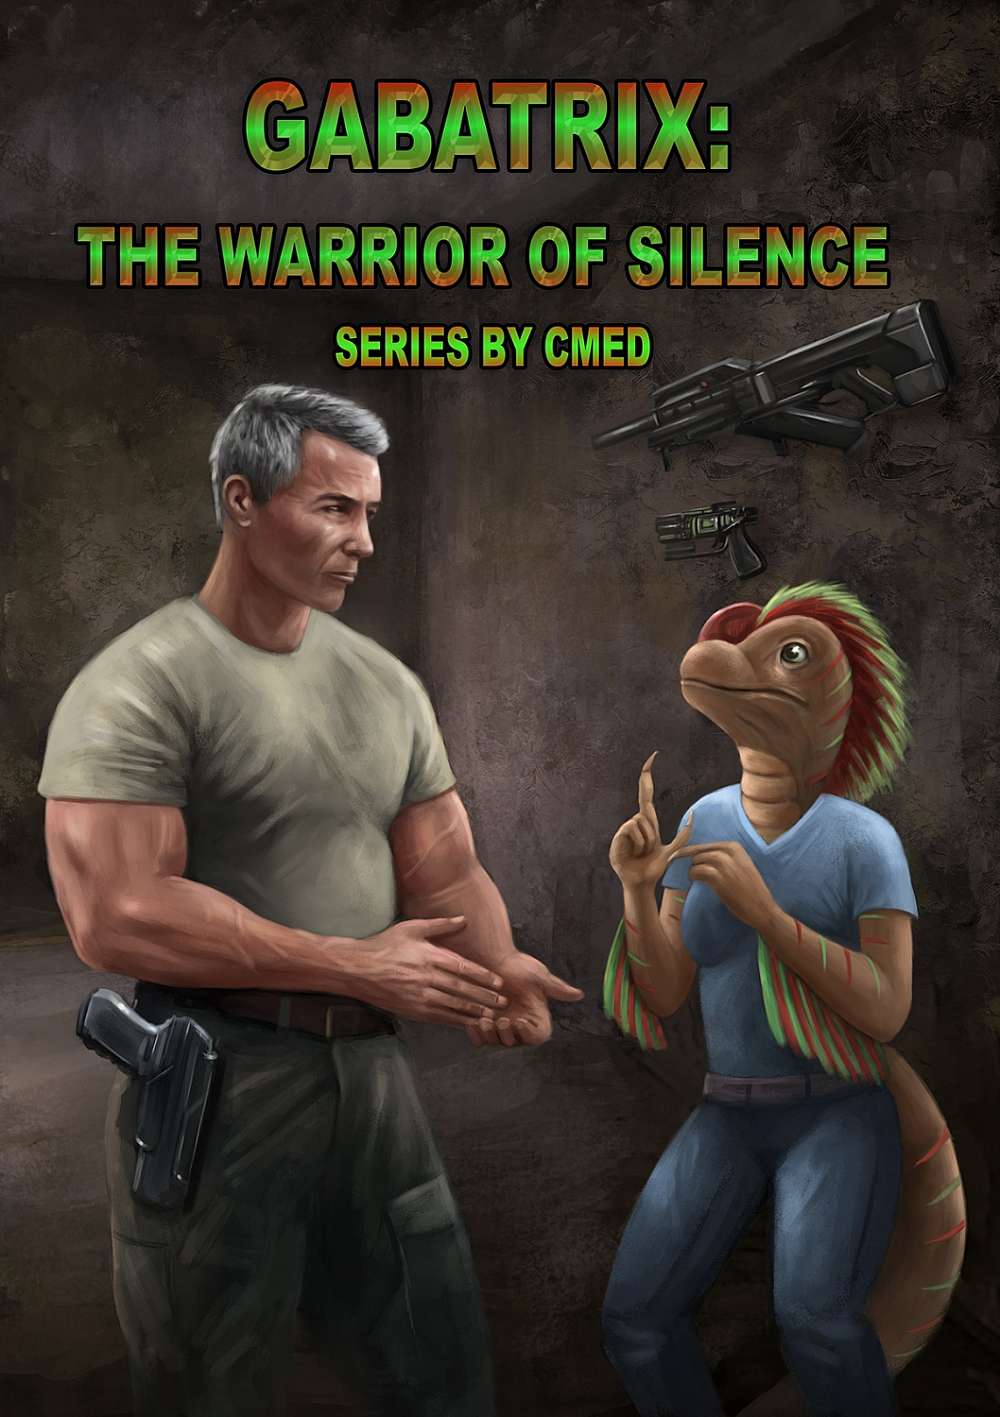 Cover - Human soldier looking at an alien female